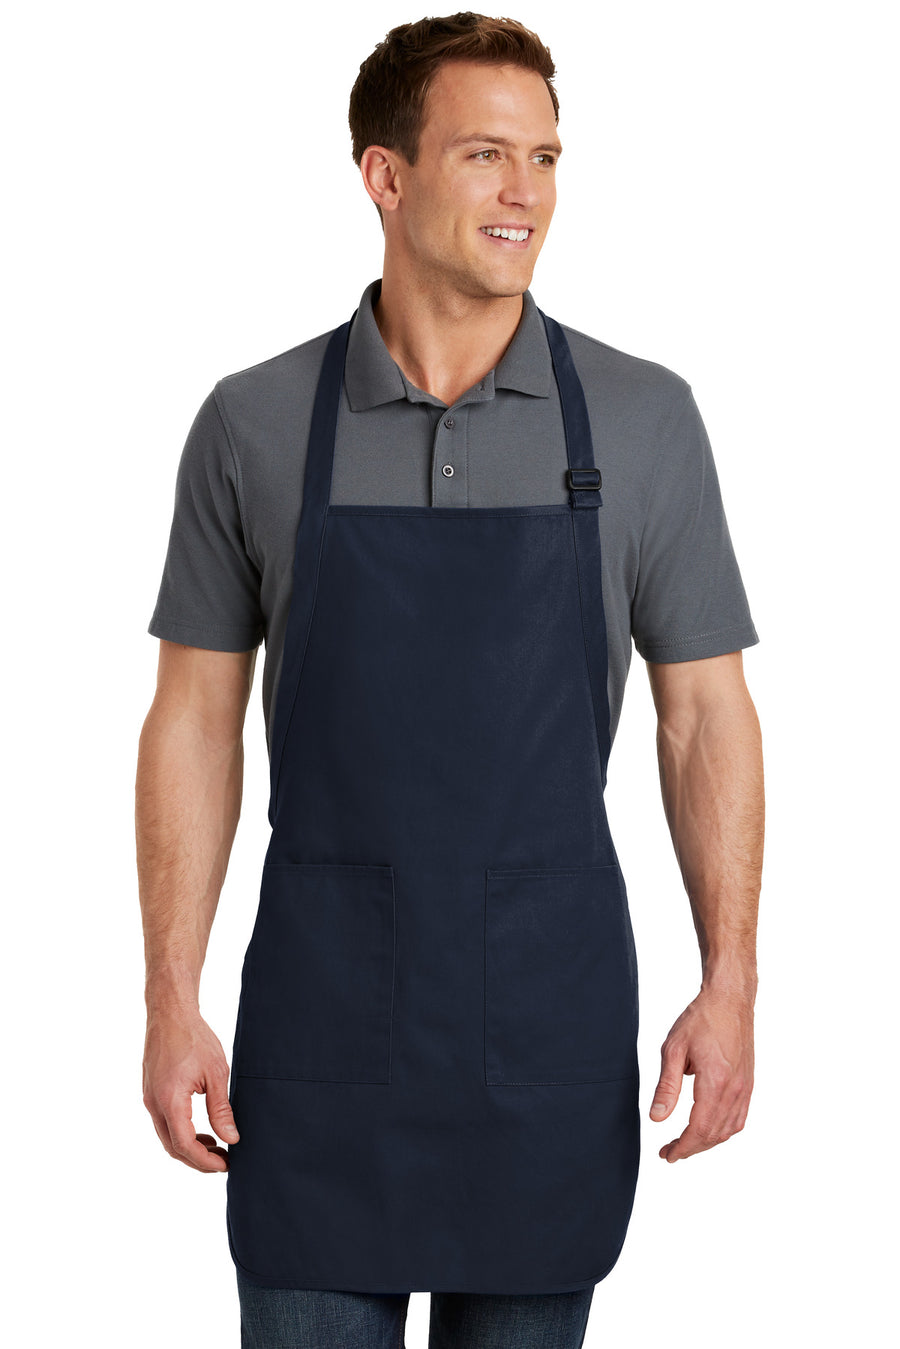 Port Authority Full-Length Apron with Pockets.